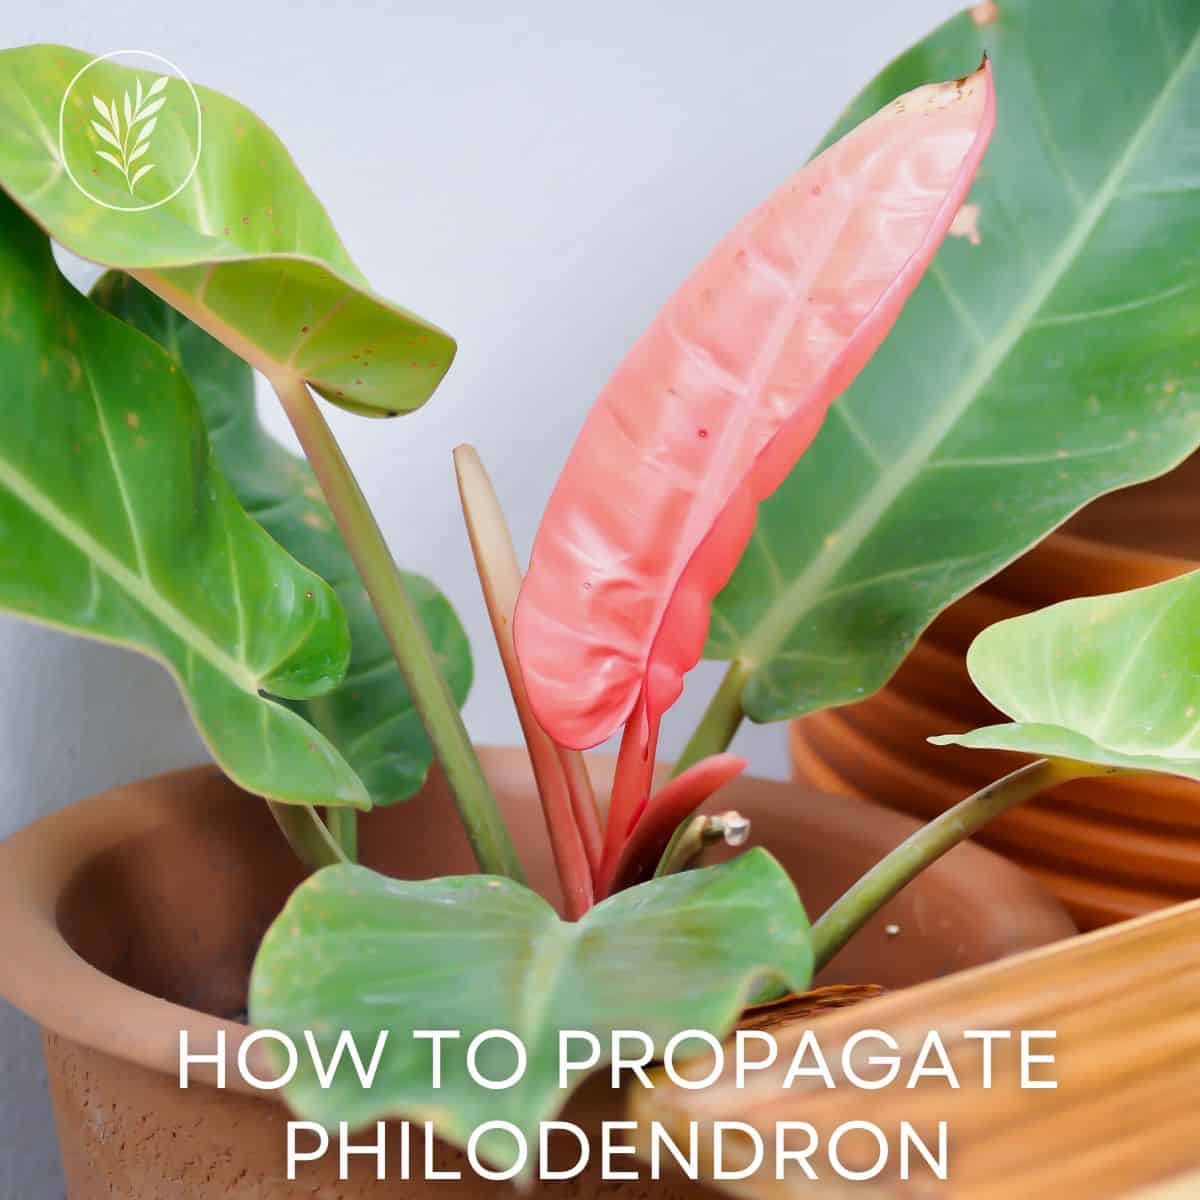 How to propagate philodendron via @home4theharvest